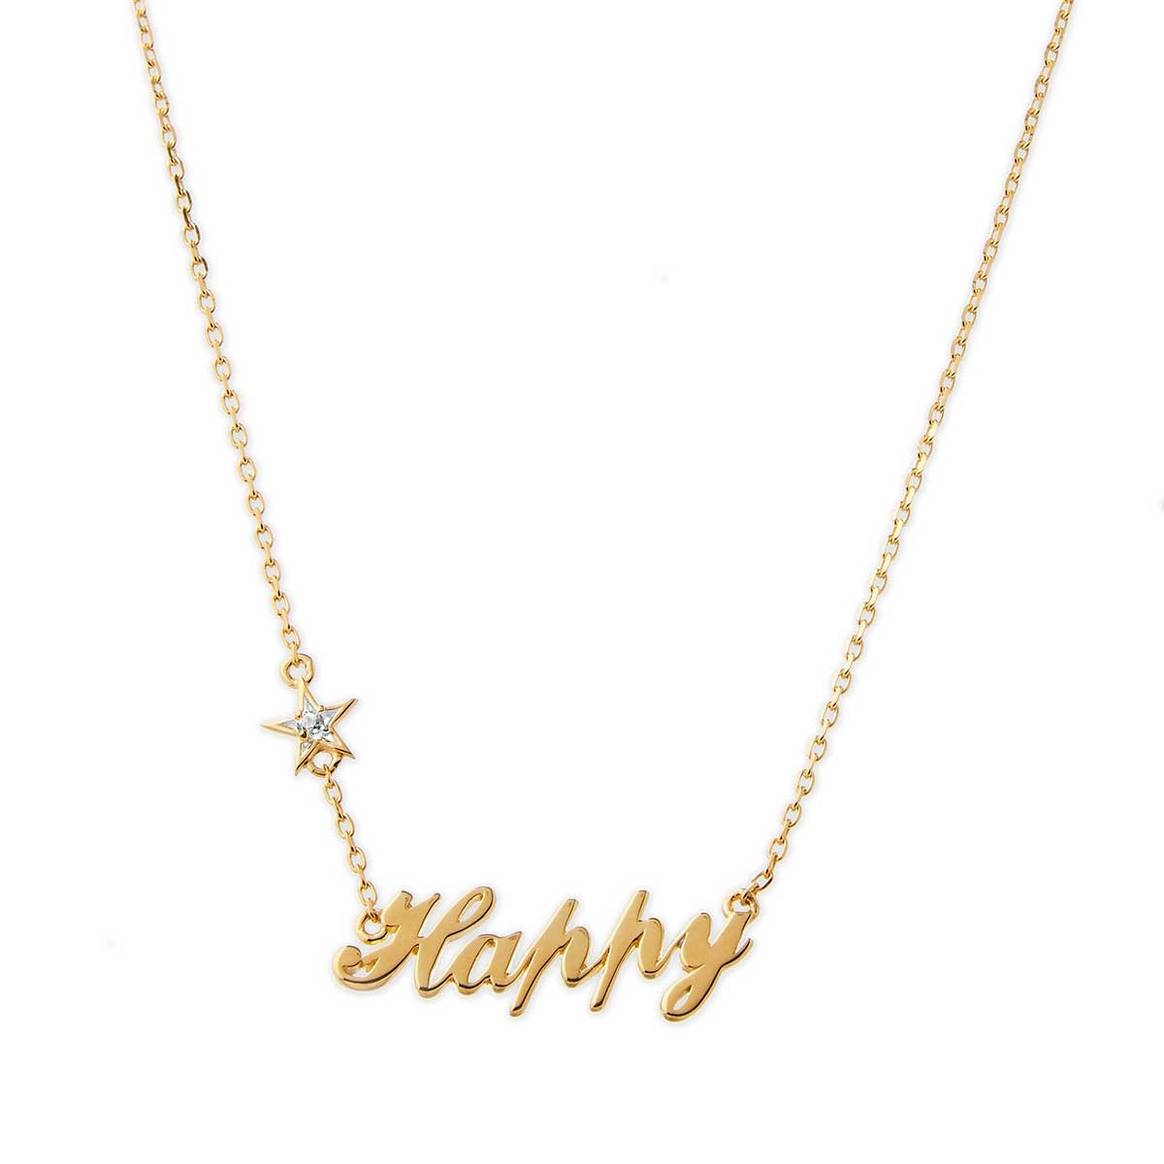 Fearne Cotton launches jewellery with Notonthehighstreet